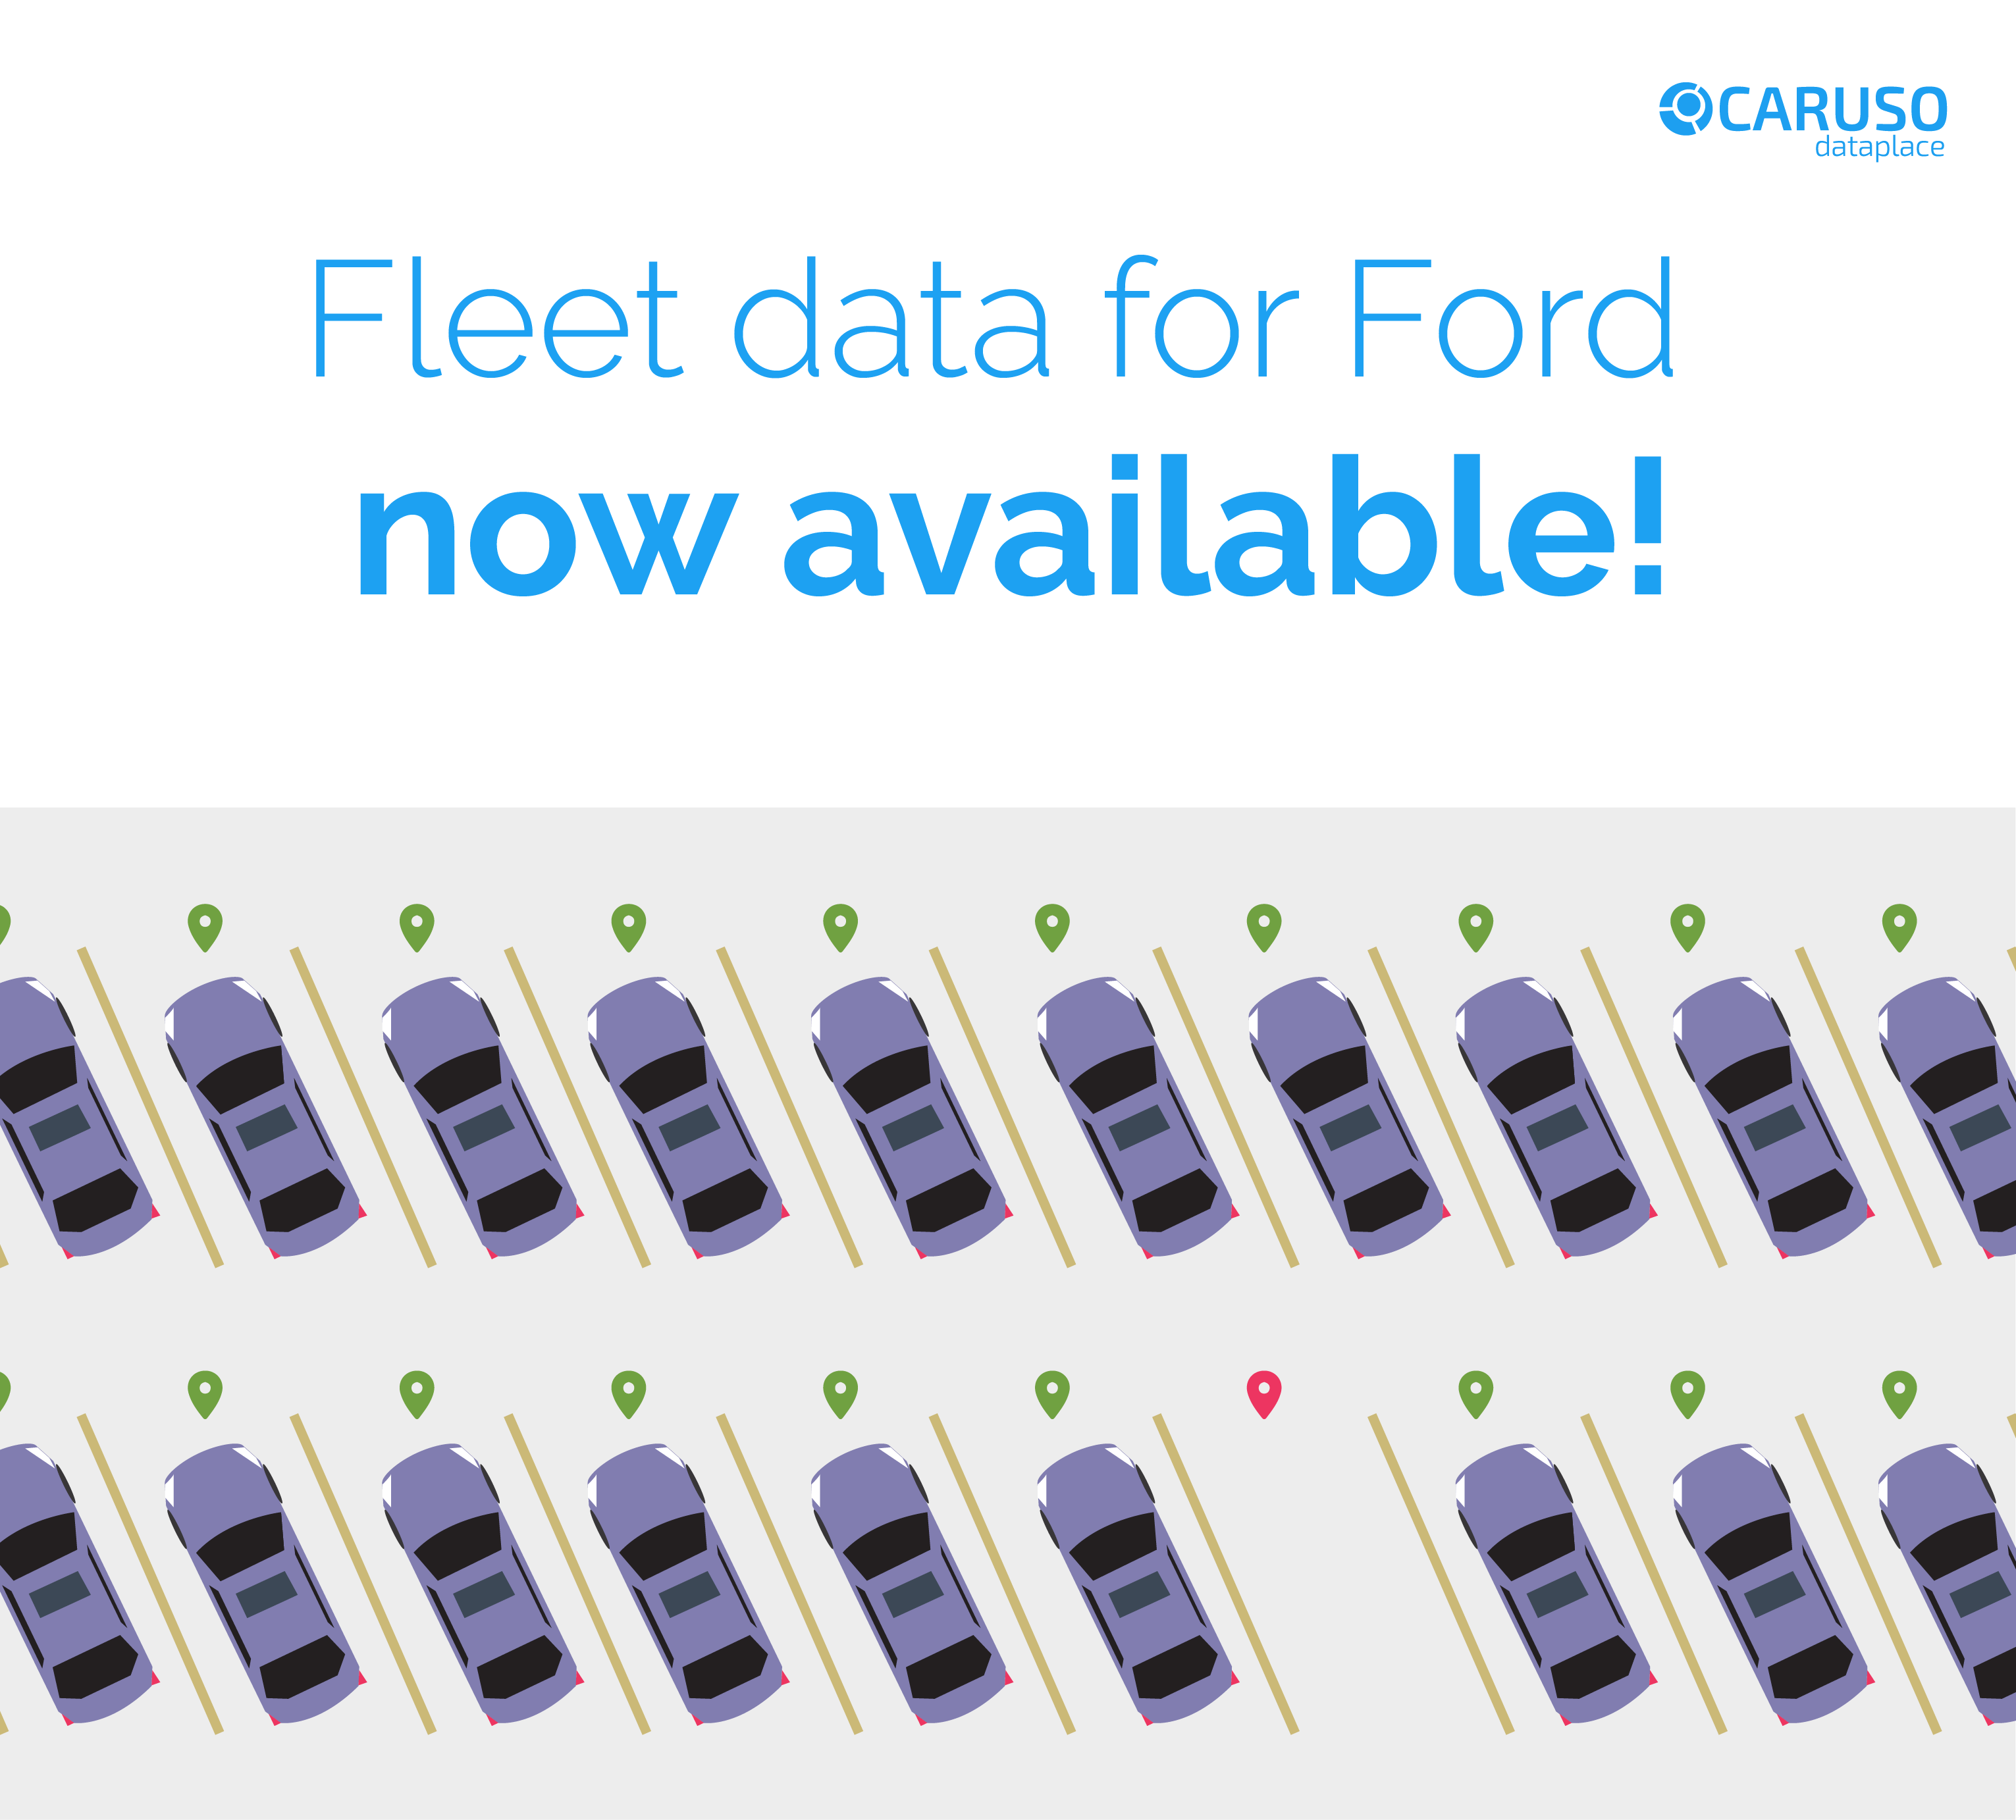 Fleet data available for Ford